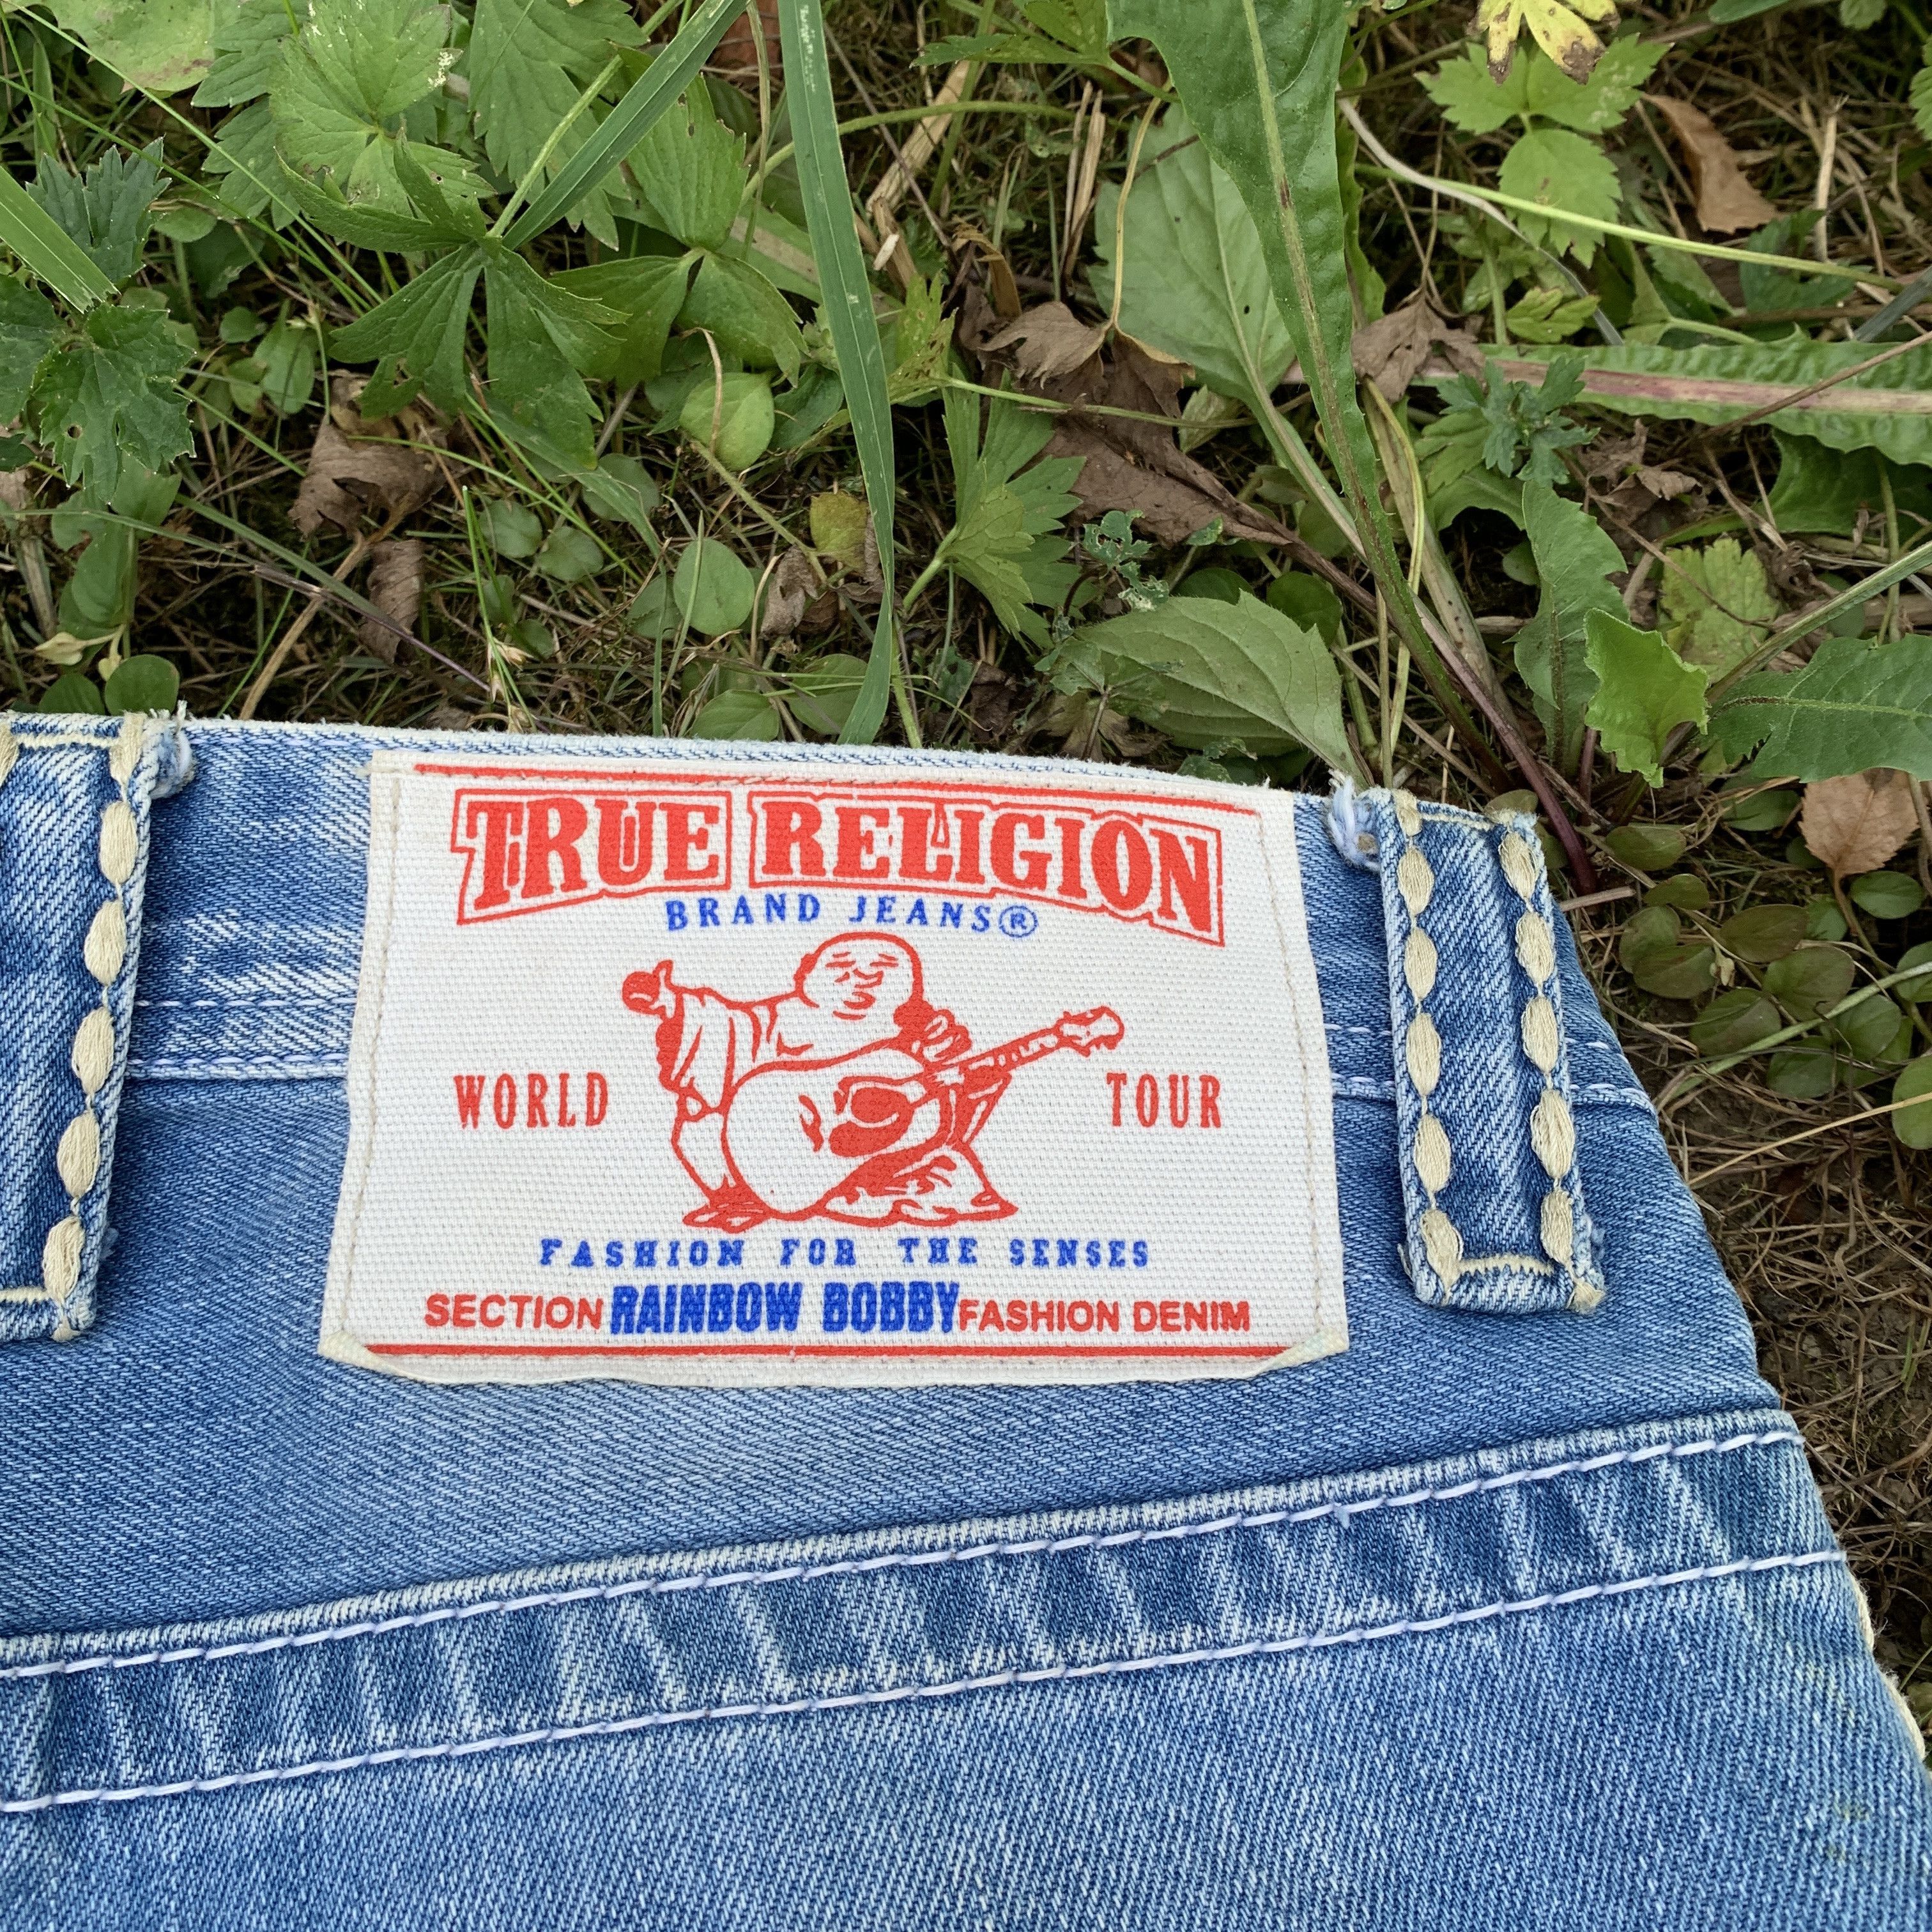 True Religion Vintage True Religion Jeans Made In USA Size US 32 / EU 48 - 5 Thumbnail